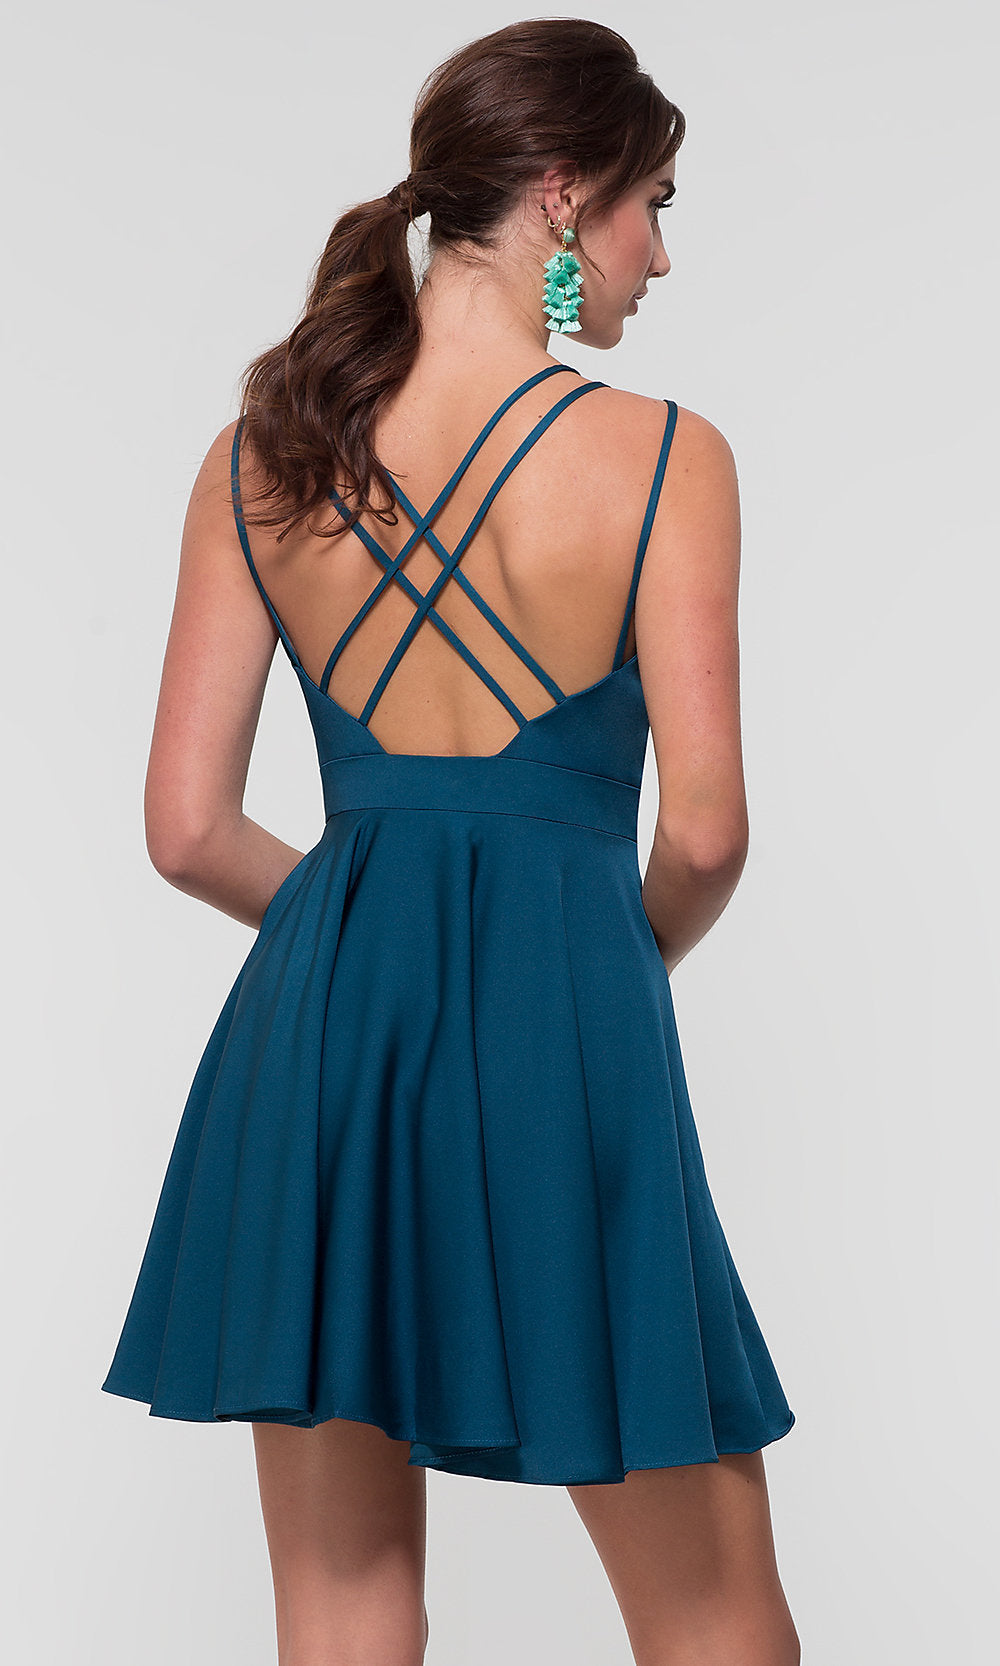  Triple-Strap Short Teal Blue Homecoming Party Dress